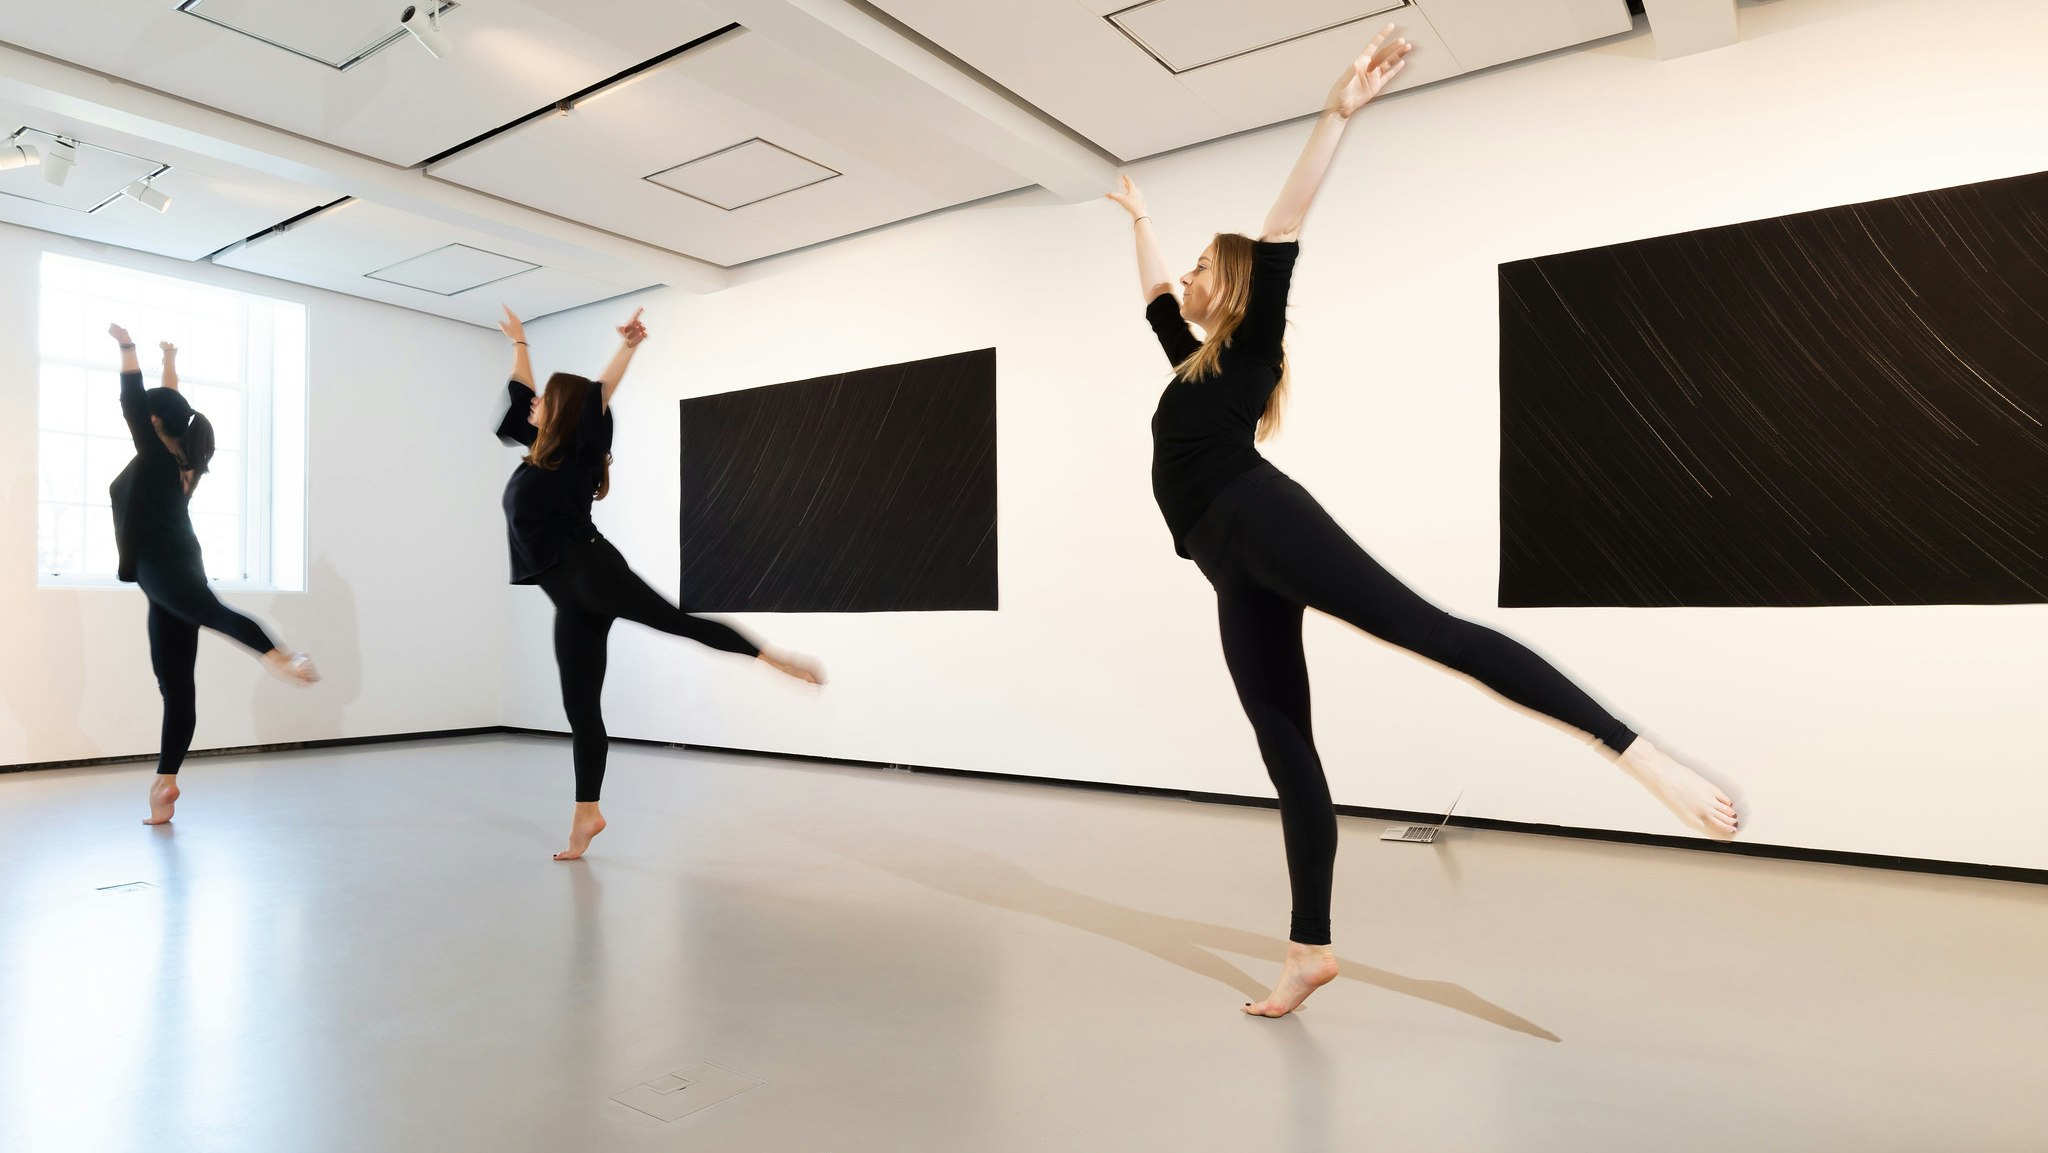 Three ballet dancers perform in a gallery.